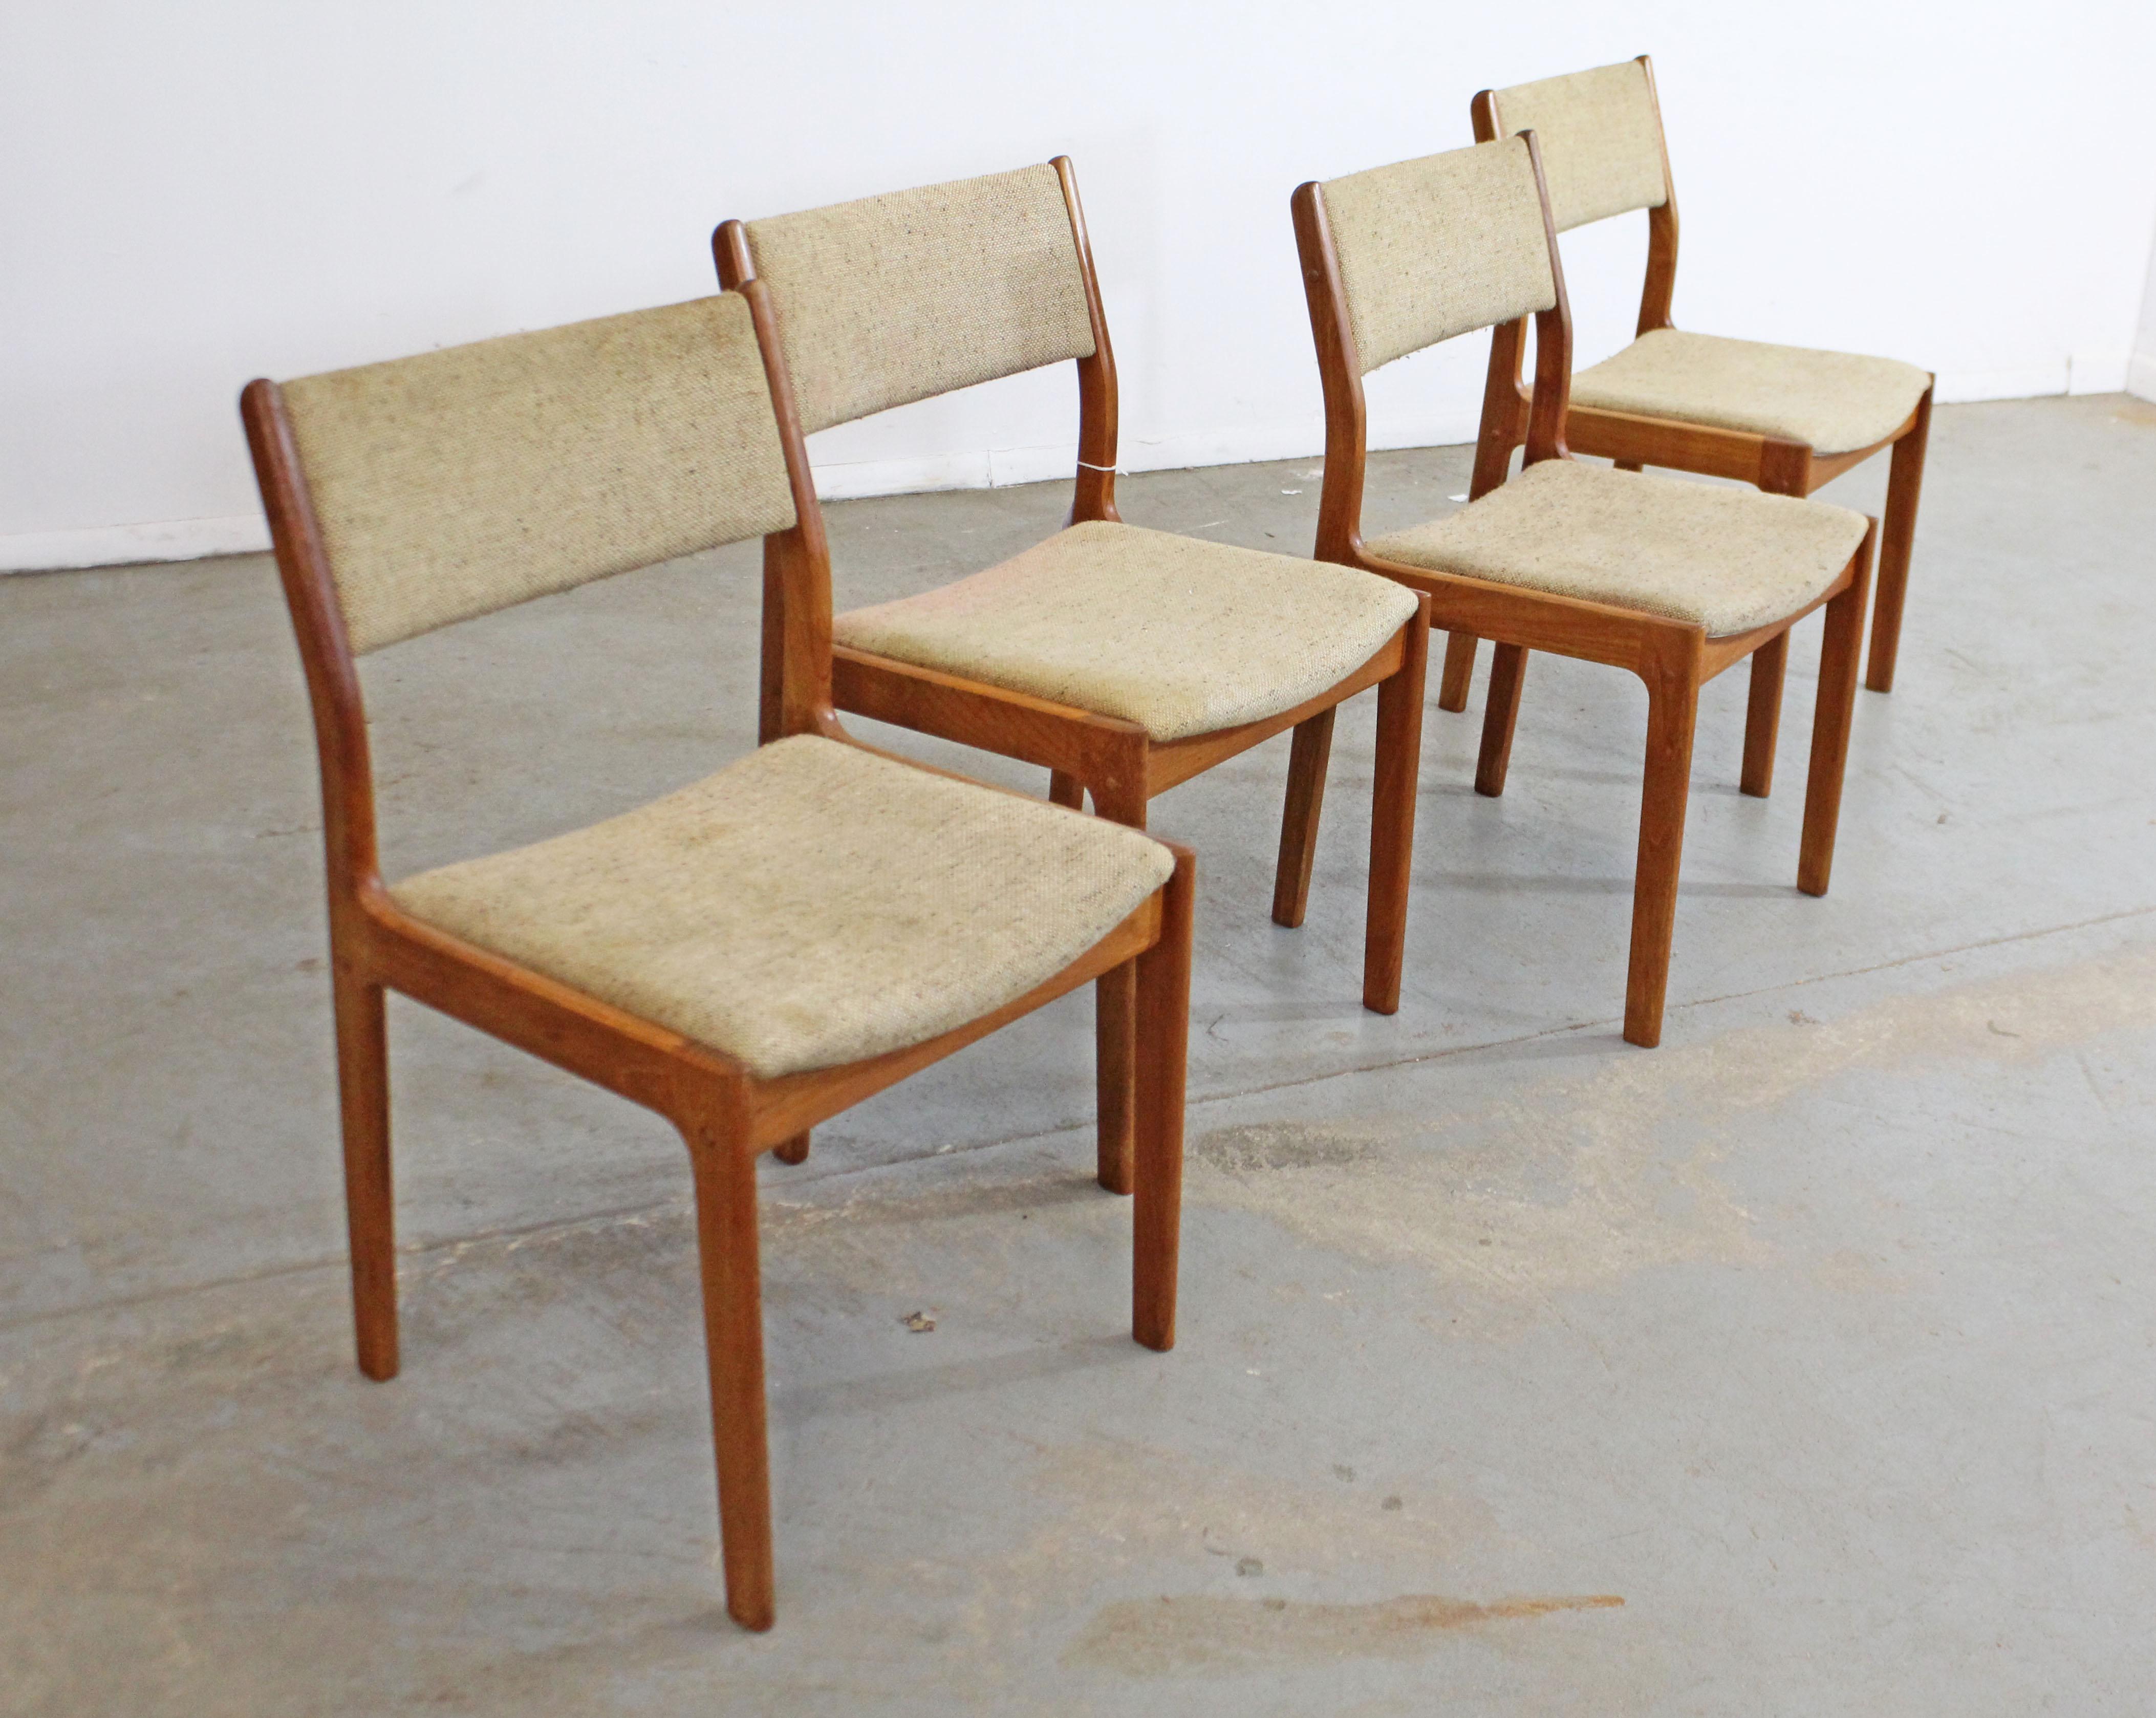 What a find. Offered is a vintage set of 4 teak side/dining chairs. This set has simple, but modern lines and could make an excellent addition to any home. They are in decent vintage condition, but can stand to be reupholstered. Has surface